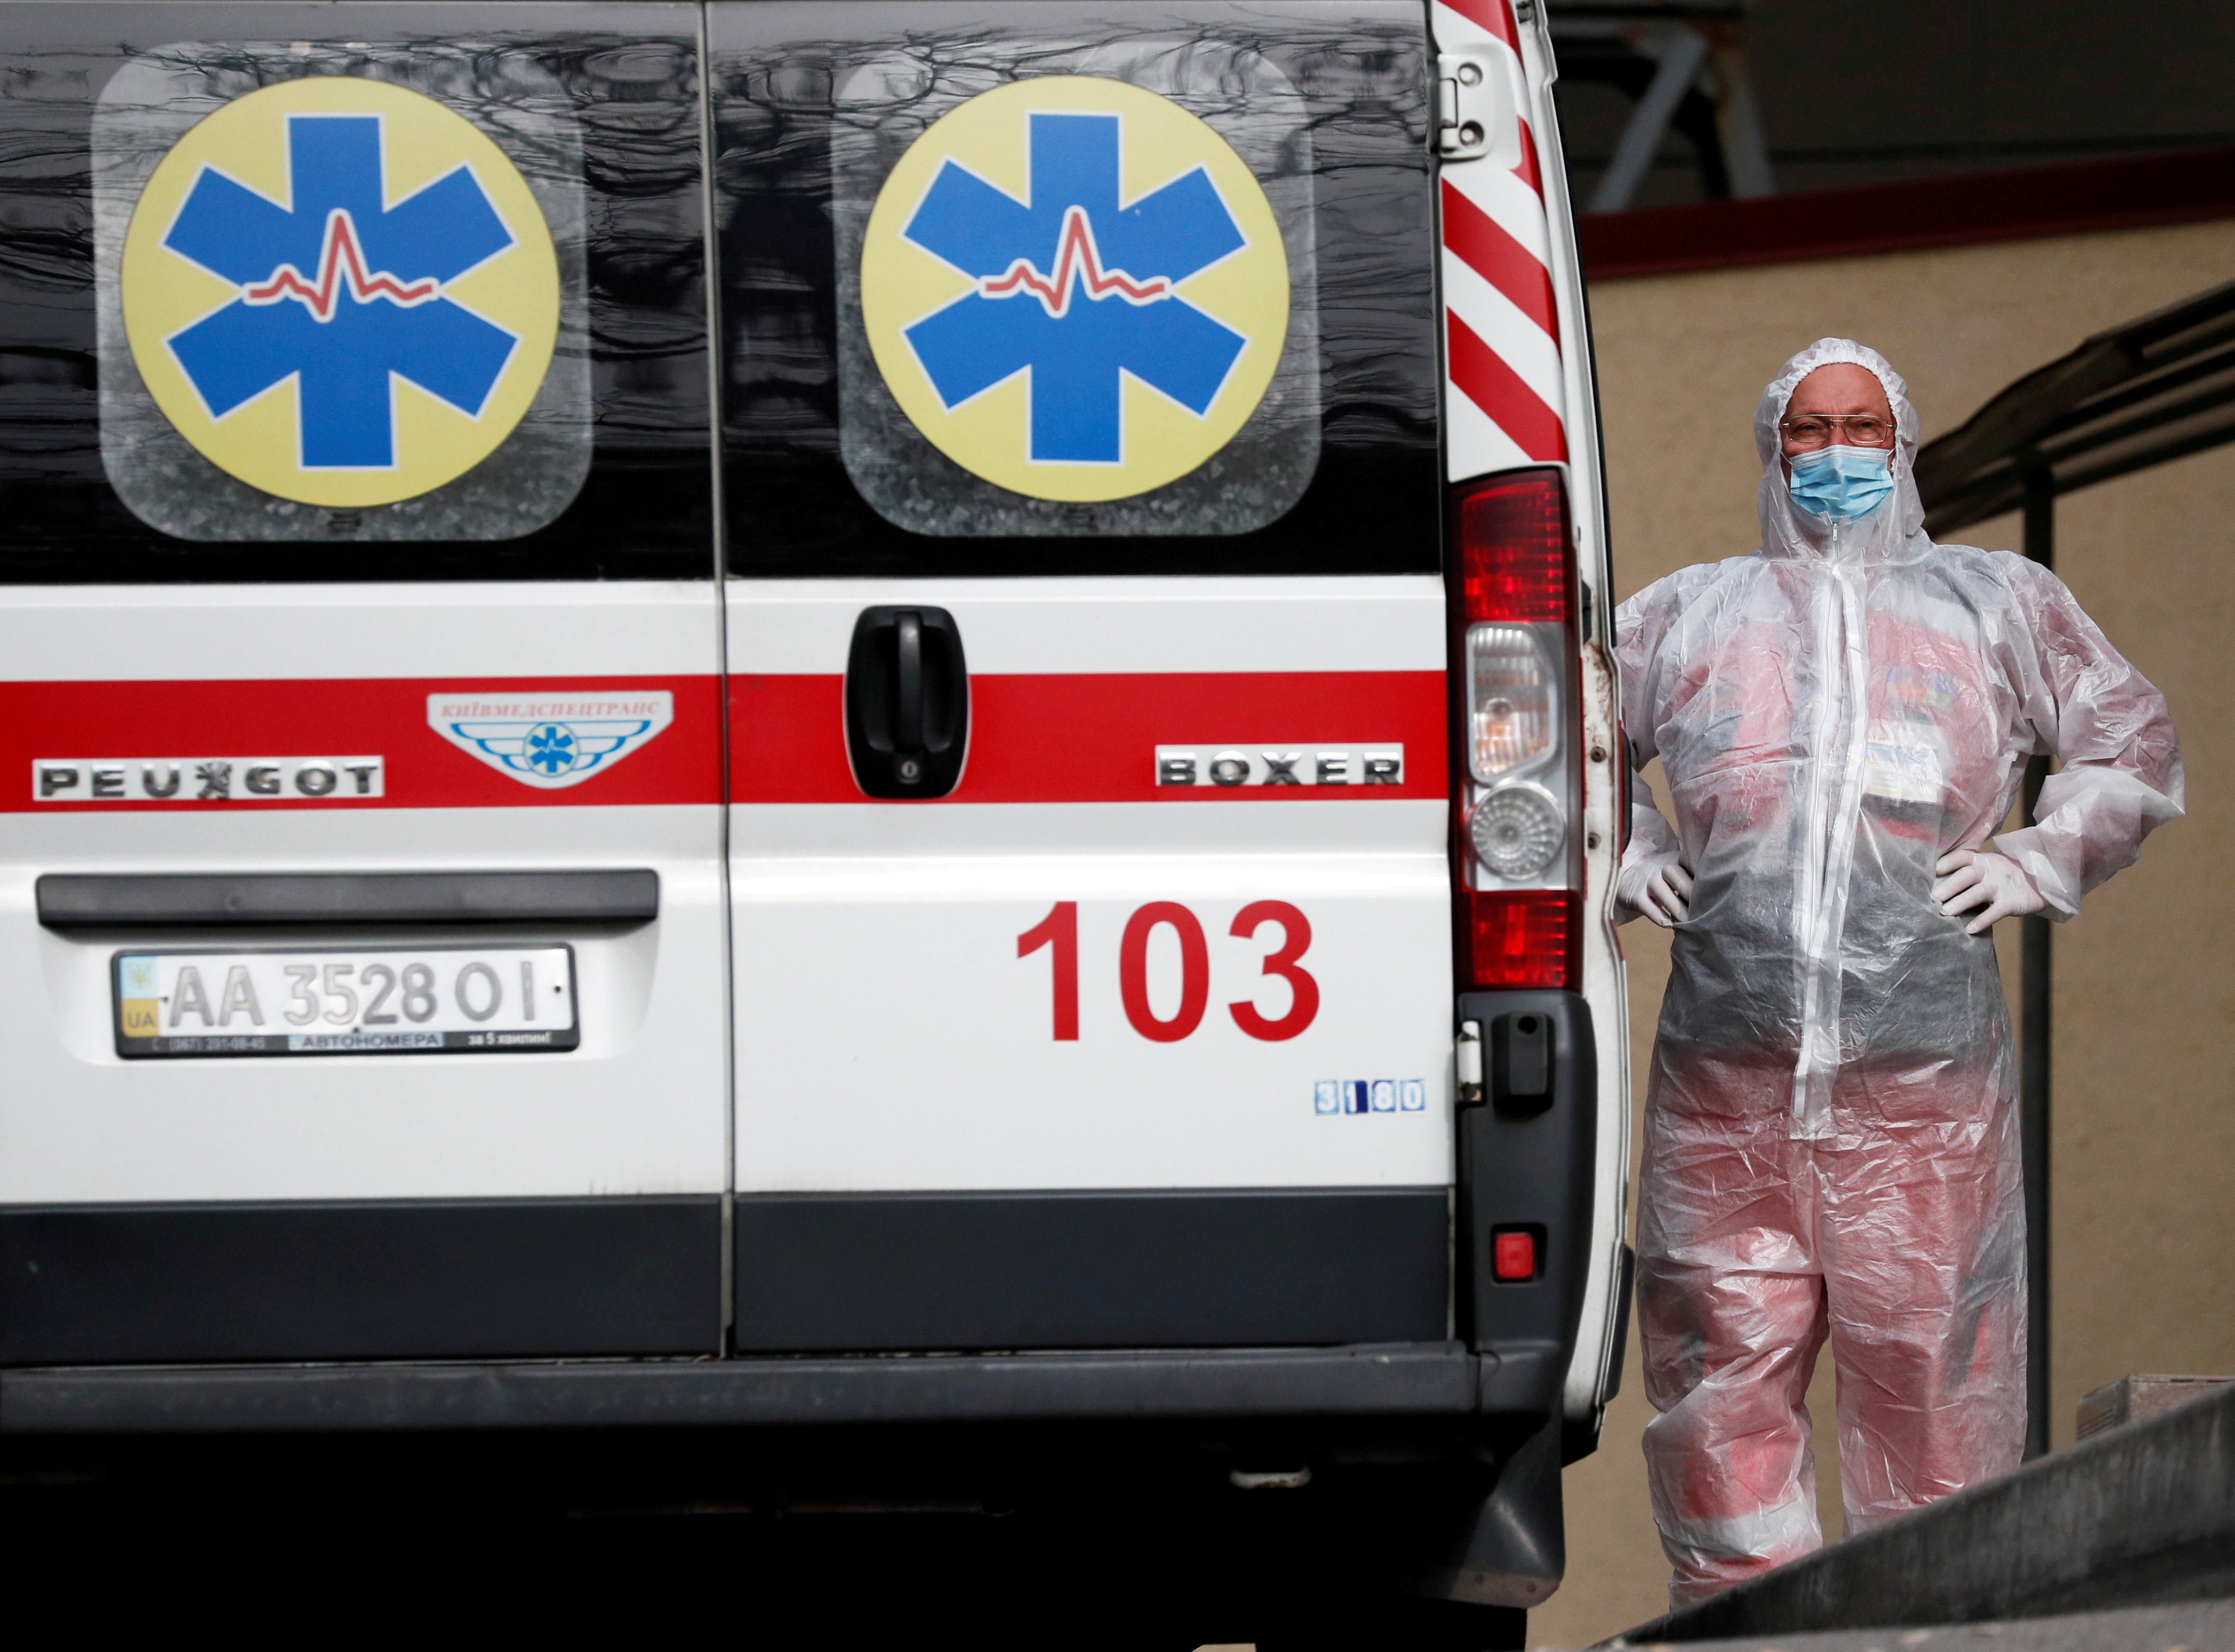 A health worker stands near an ambulance carrying a COVID-19 patient, as they wait in the queue at a hospital for people infected with the coronavirus disease in Kyiv, Ukraine October 18, 2021. REUTERS/Gleb Garanich